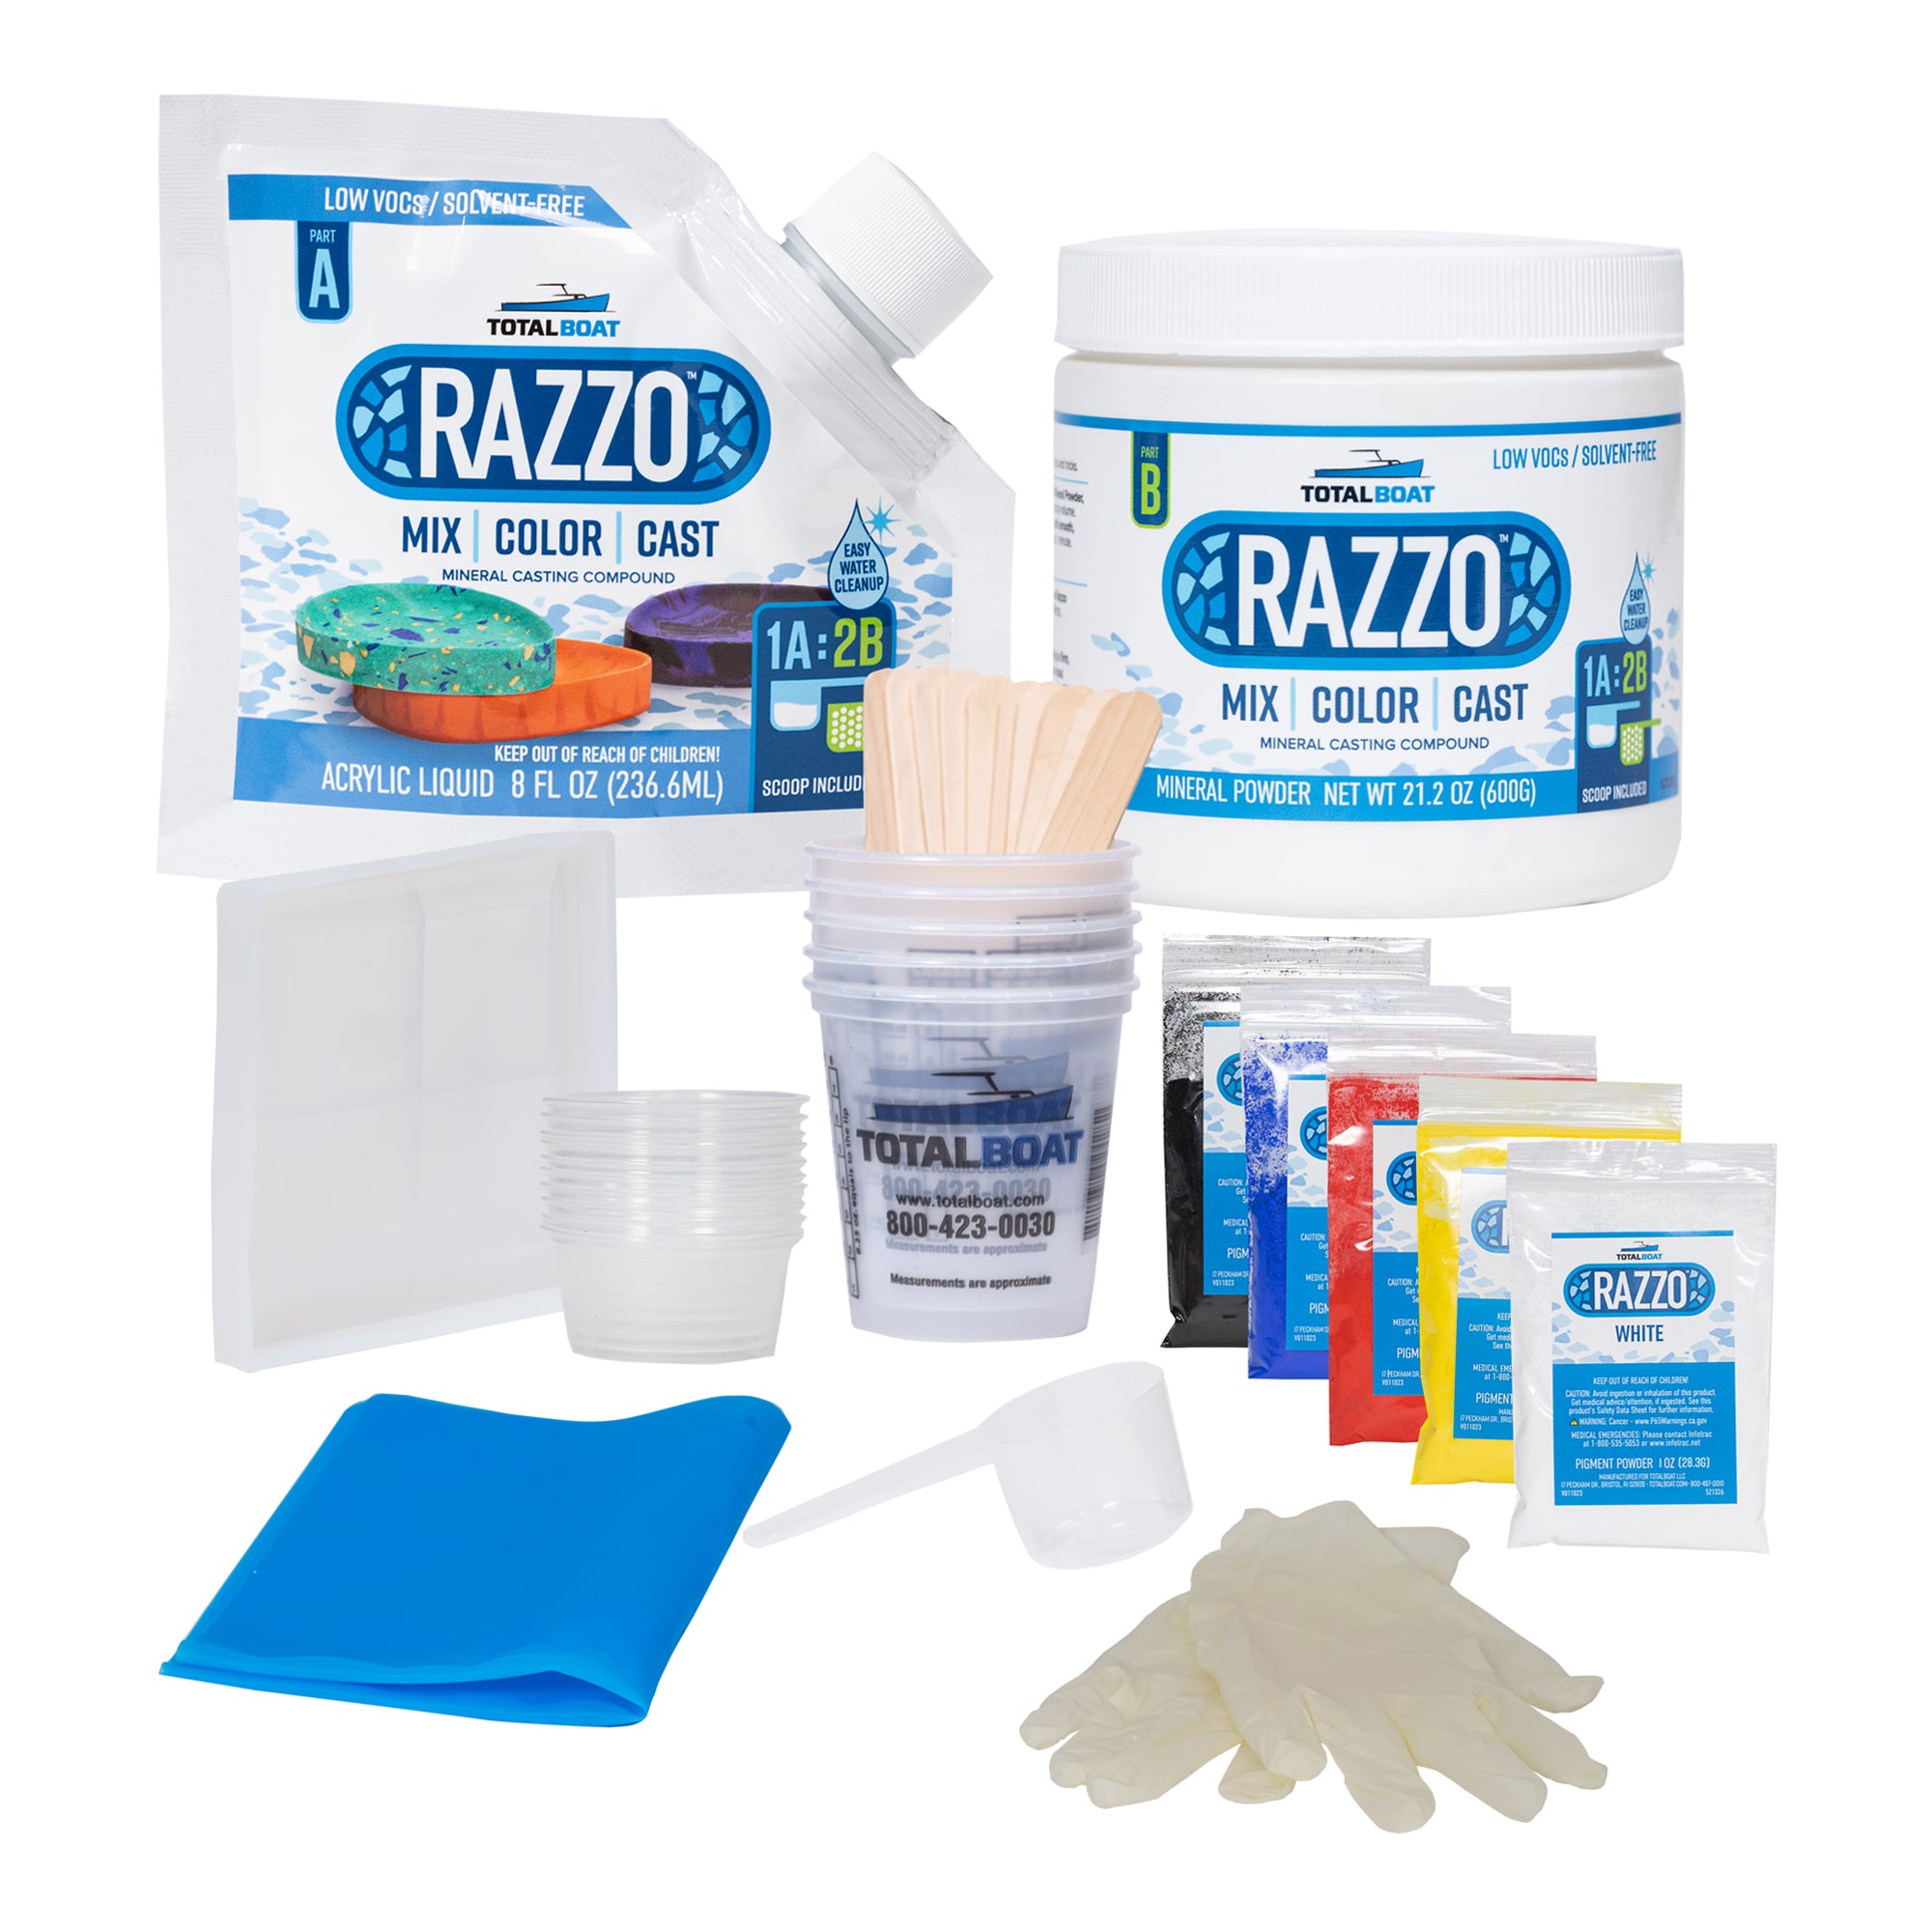 The Complete Paint Mixing Kit